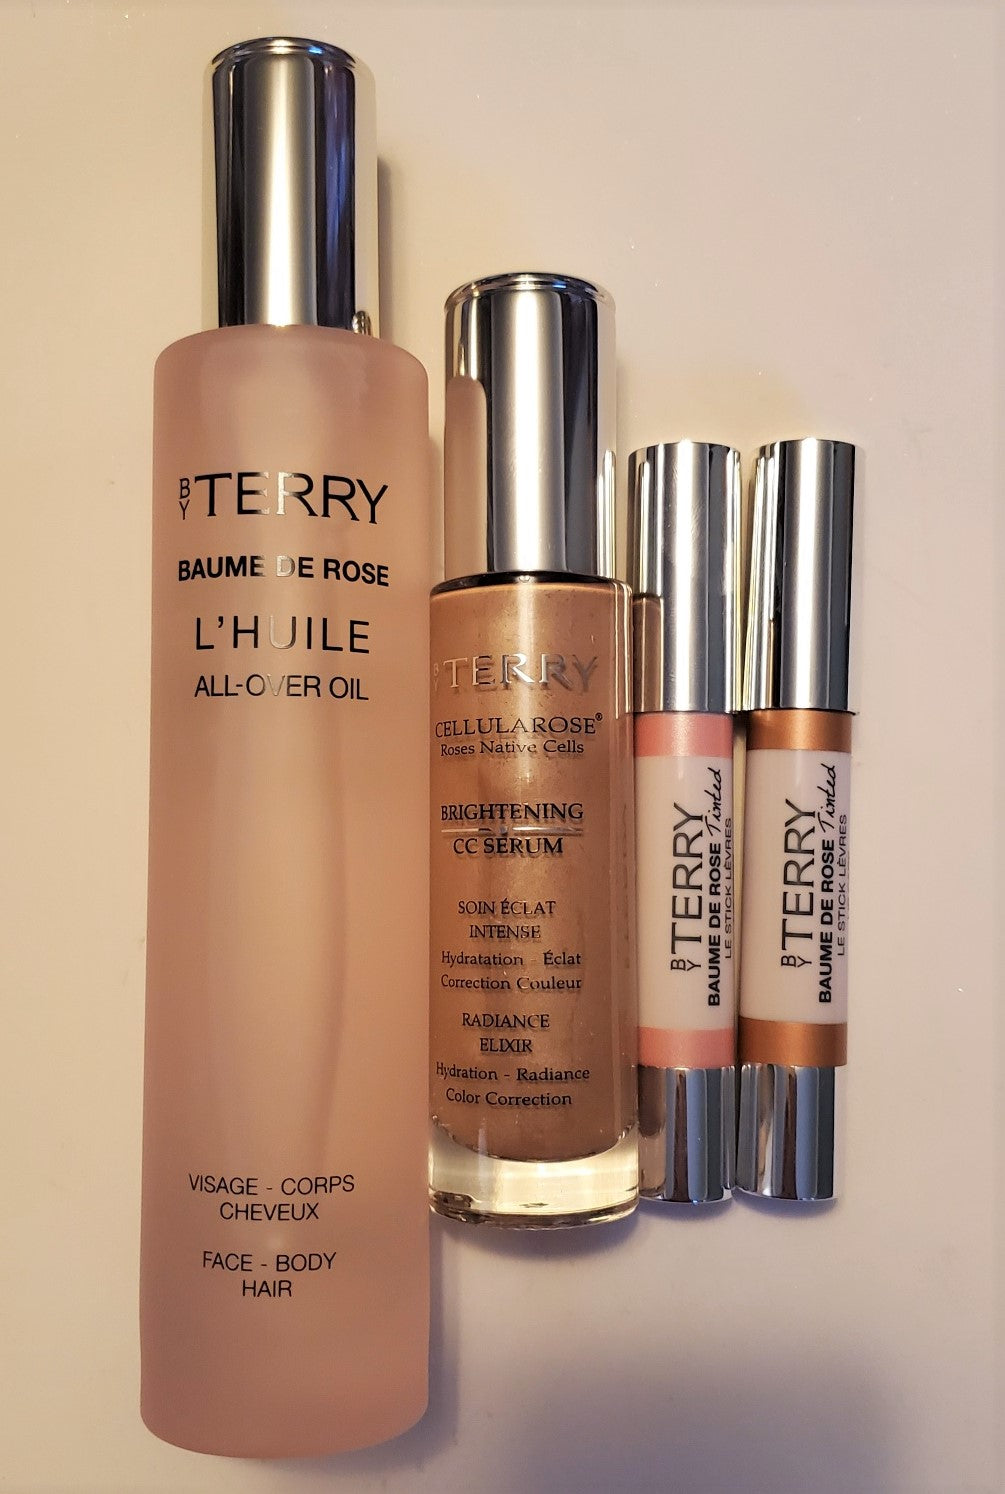 Review, Ingredients, Photos, Skincare Trends 2020, 2021: By Terry, Baume De Rose, L'Huile All-Over Oil, Brightening CC Serum, Tinted Lip Balm Pencil